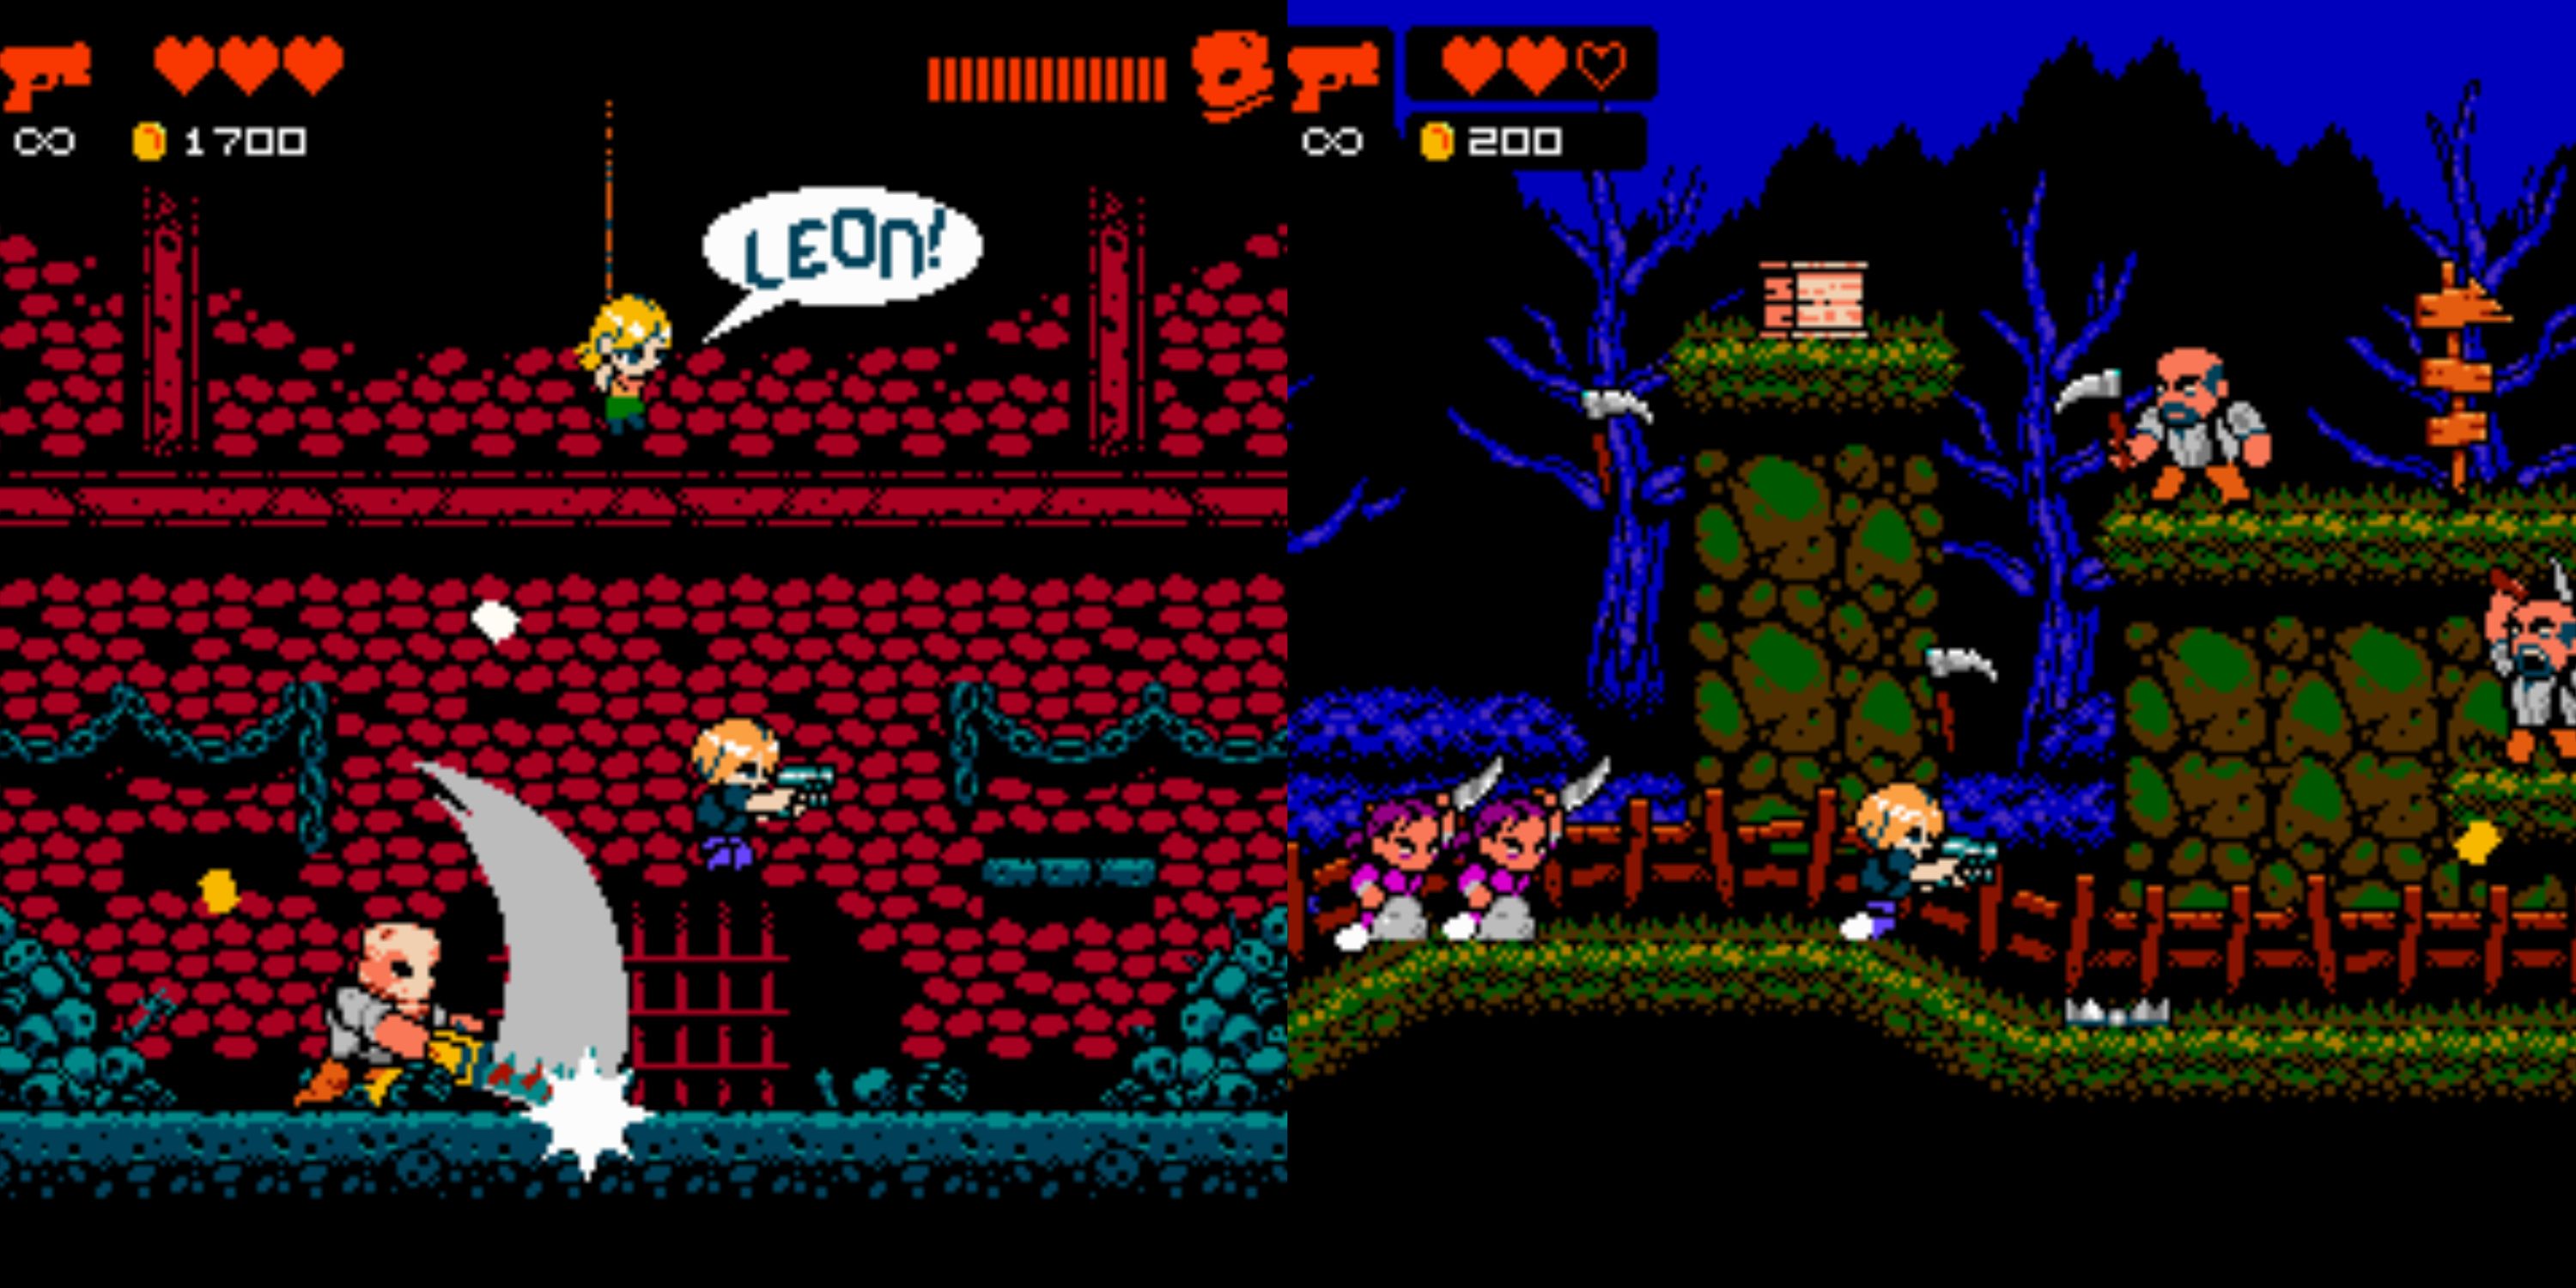 Leon fights off the enemy who uses a chainsaw to save Ashley and Leon fights off a bunch of villagers